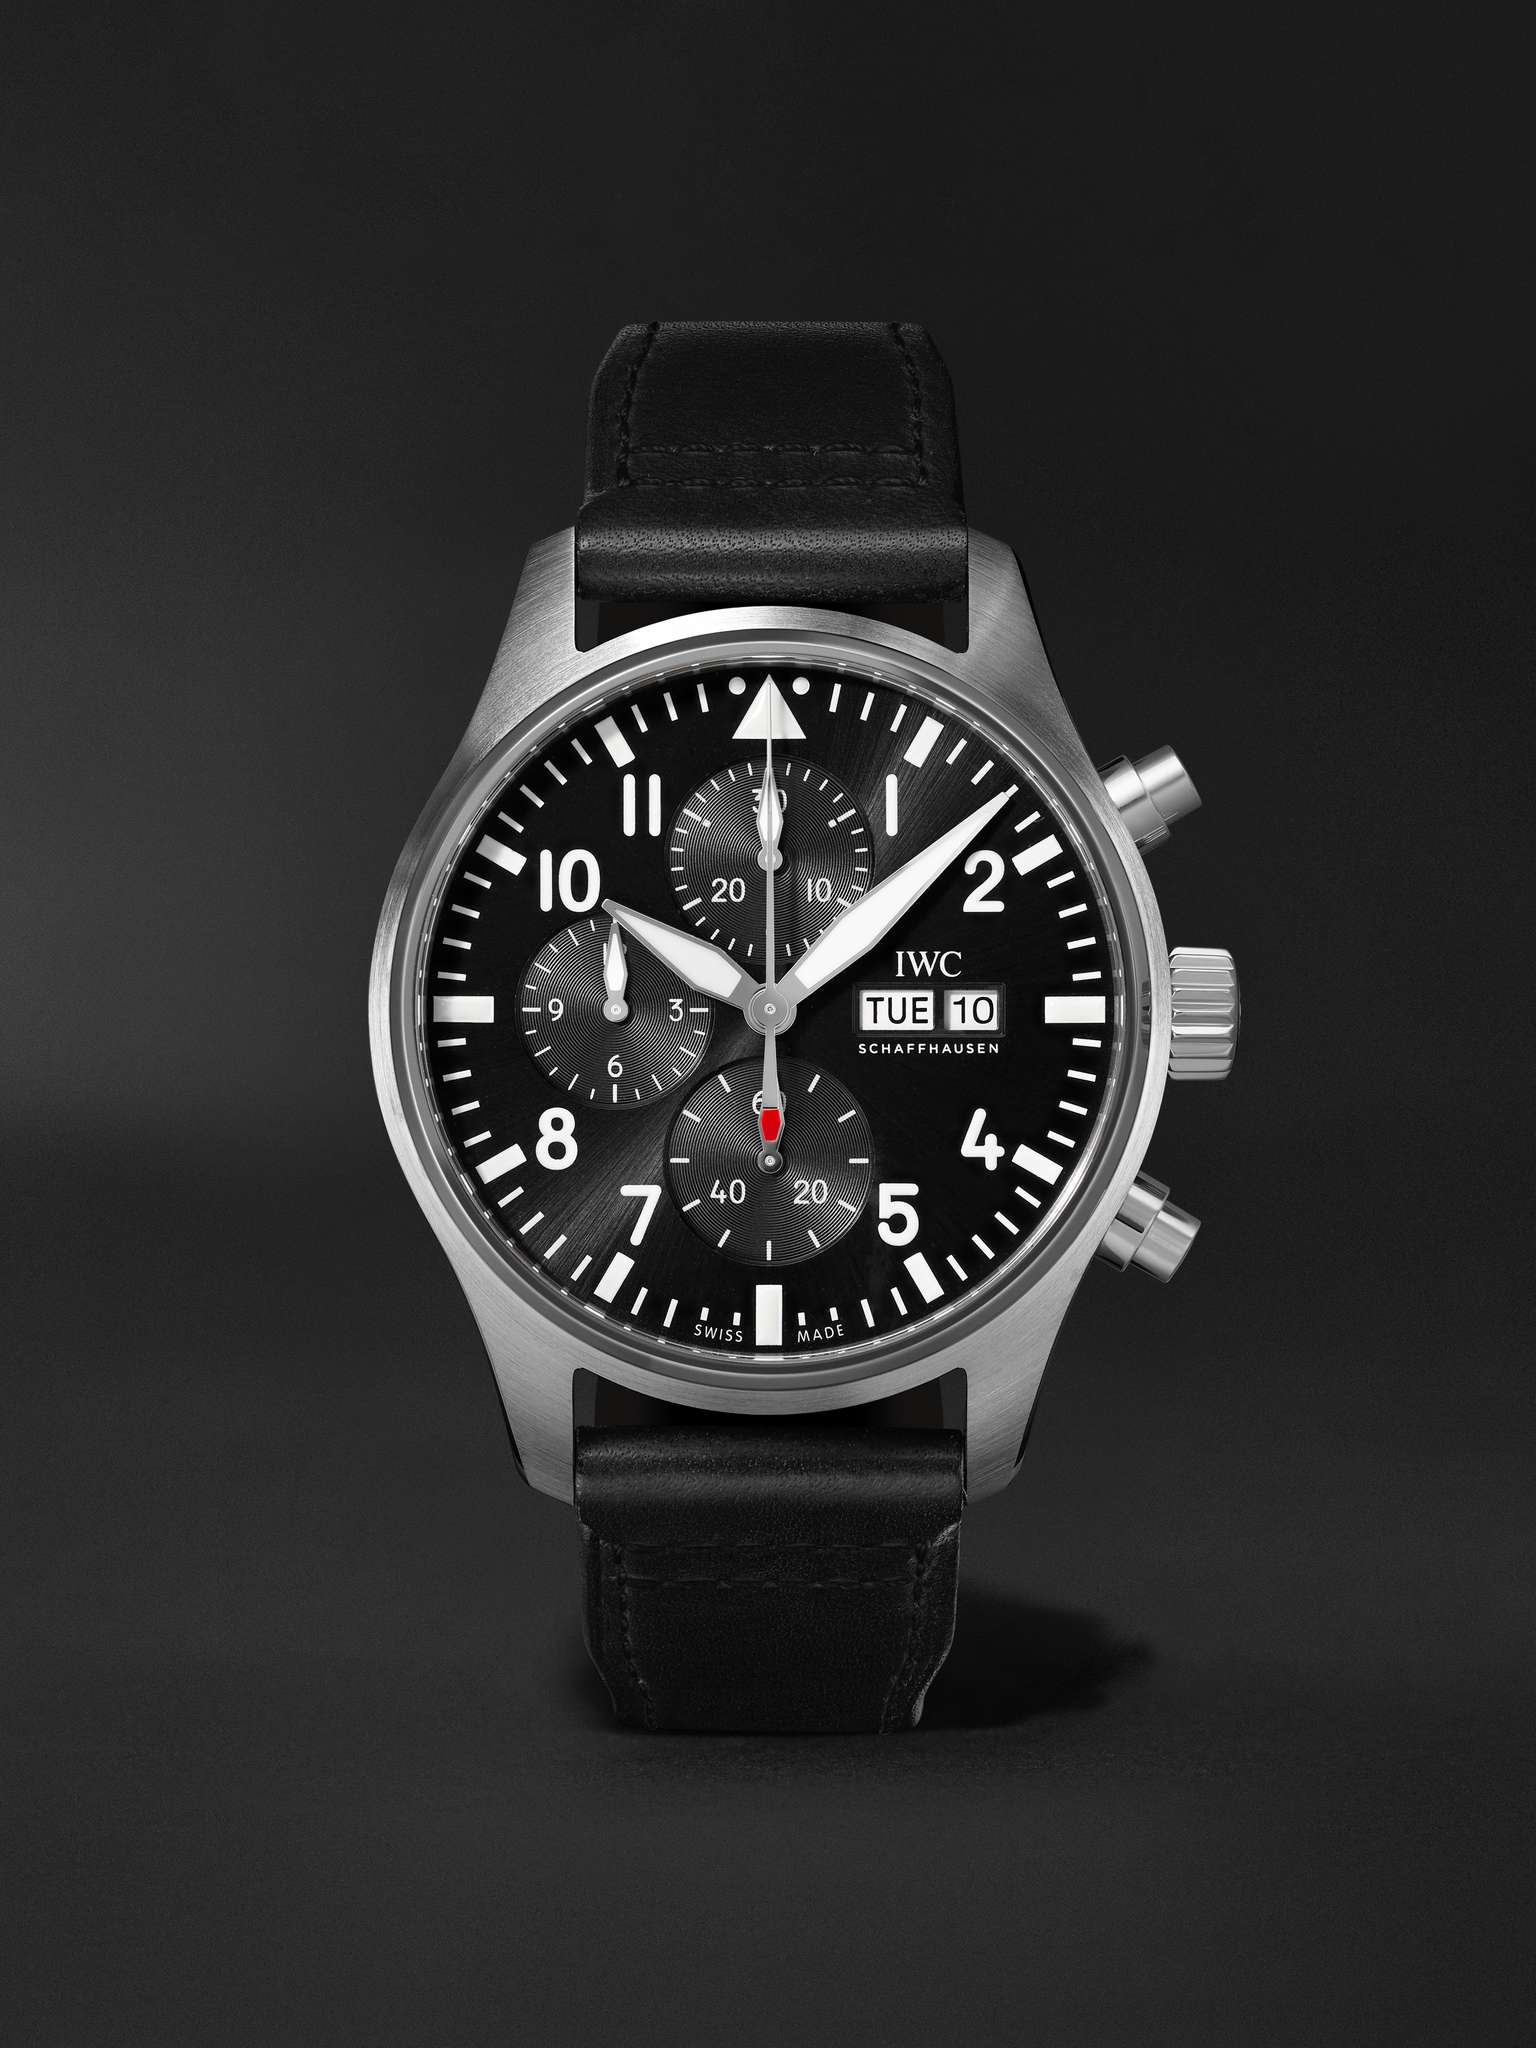 Pilot's Automatic Chronograph 43mm Stainless Steel and Leather Watch, Ref. No. IWIW378001 - 1